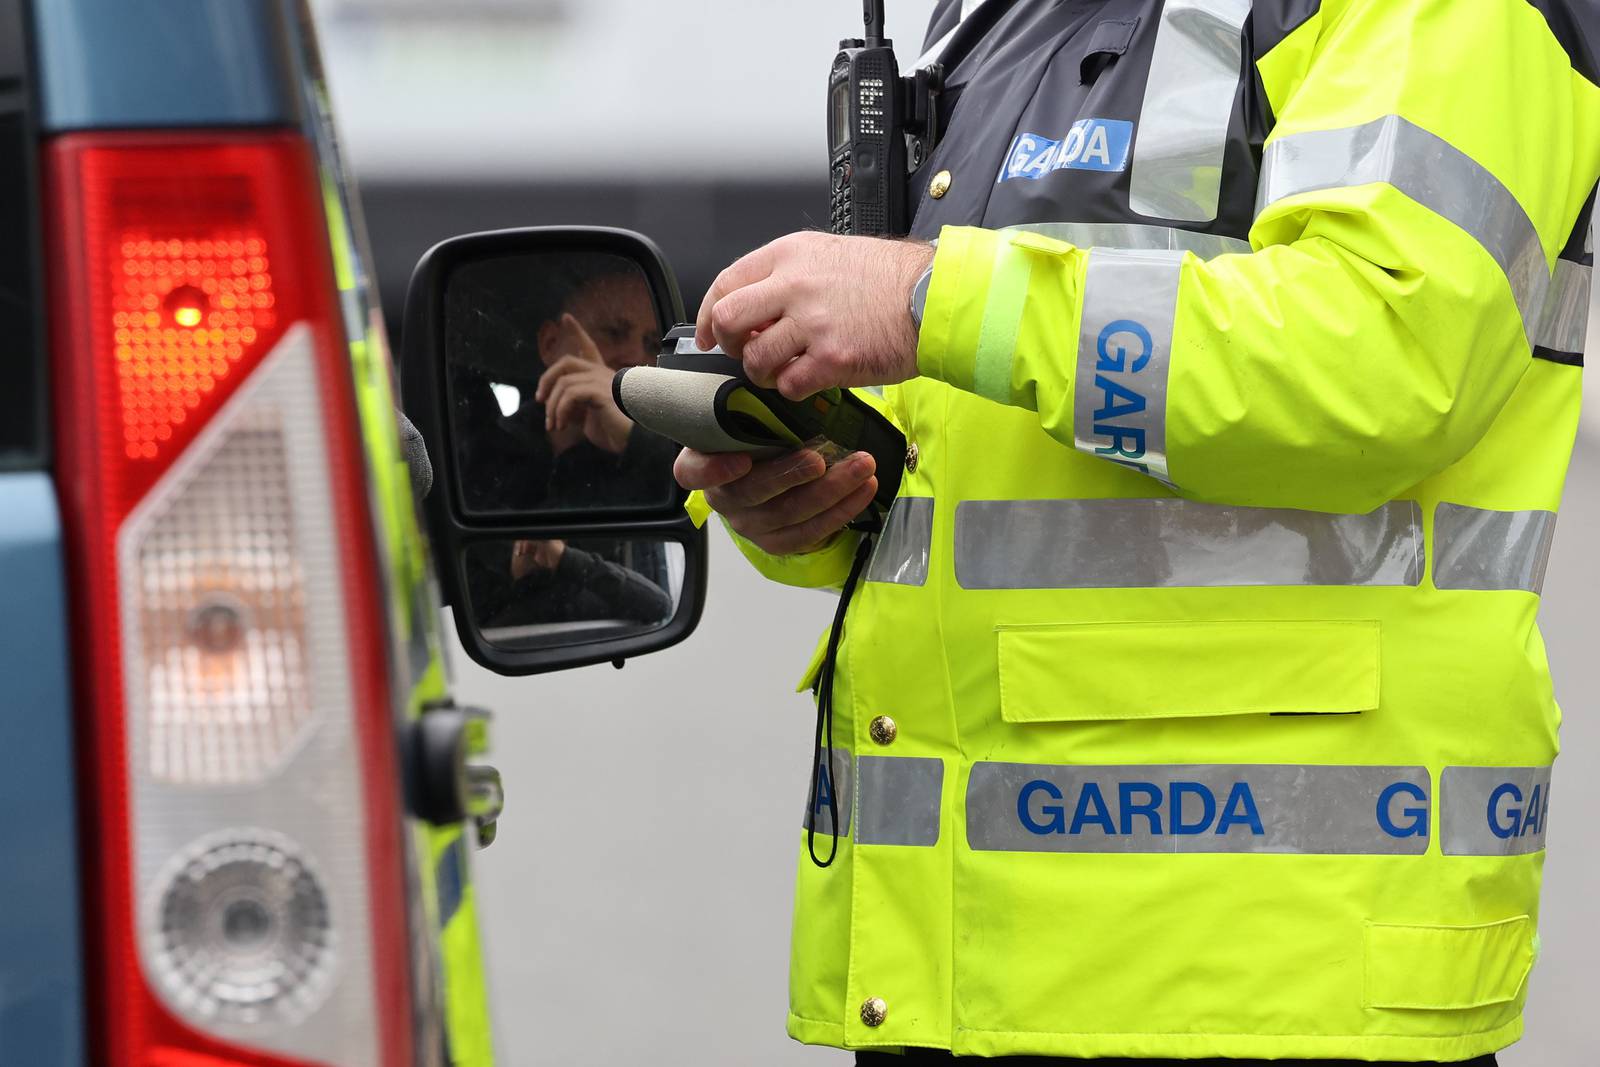 14/03/2022 - NEWS - The Road Safety Authority (RSA) and An Garda Síochána have launched their St. Patrick’s Weekend Bank Holiday road safety appeal.  GV from the Garda checkpoint on the Chapelizod Road.  Photograph Nick Bradshaw for The Irish Times